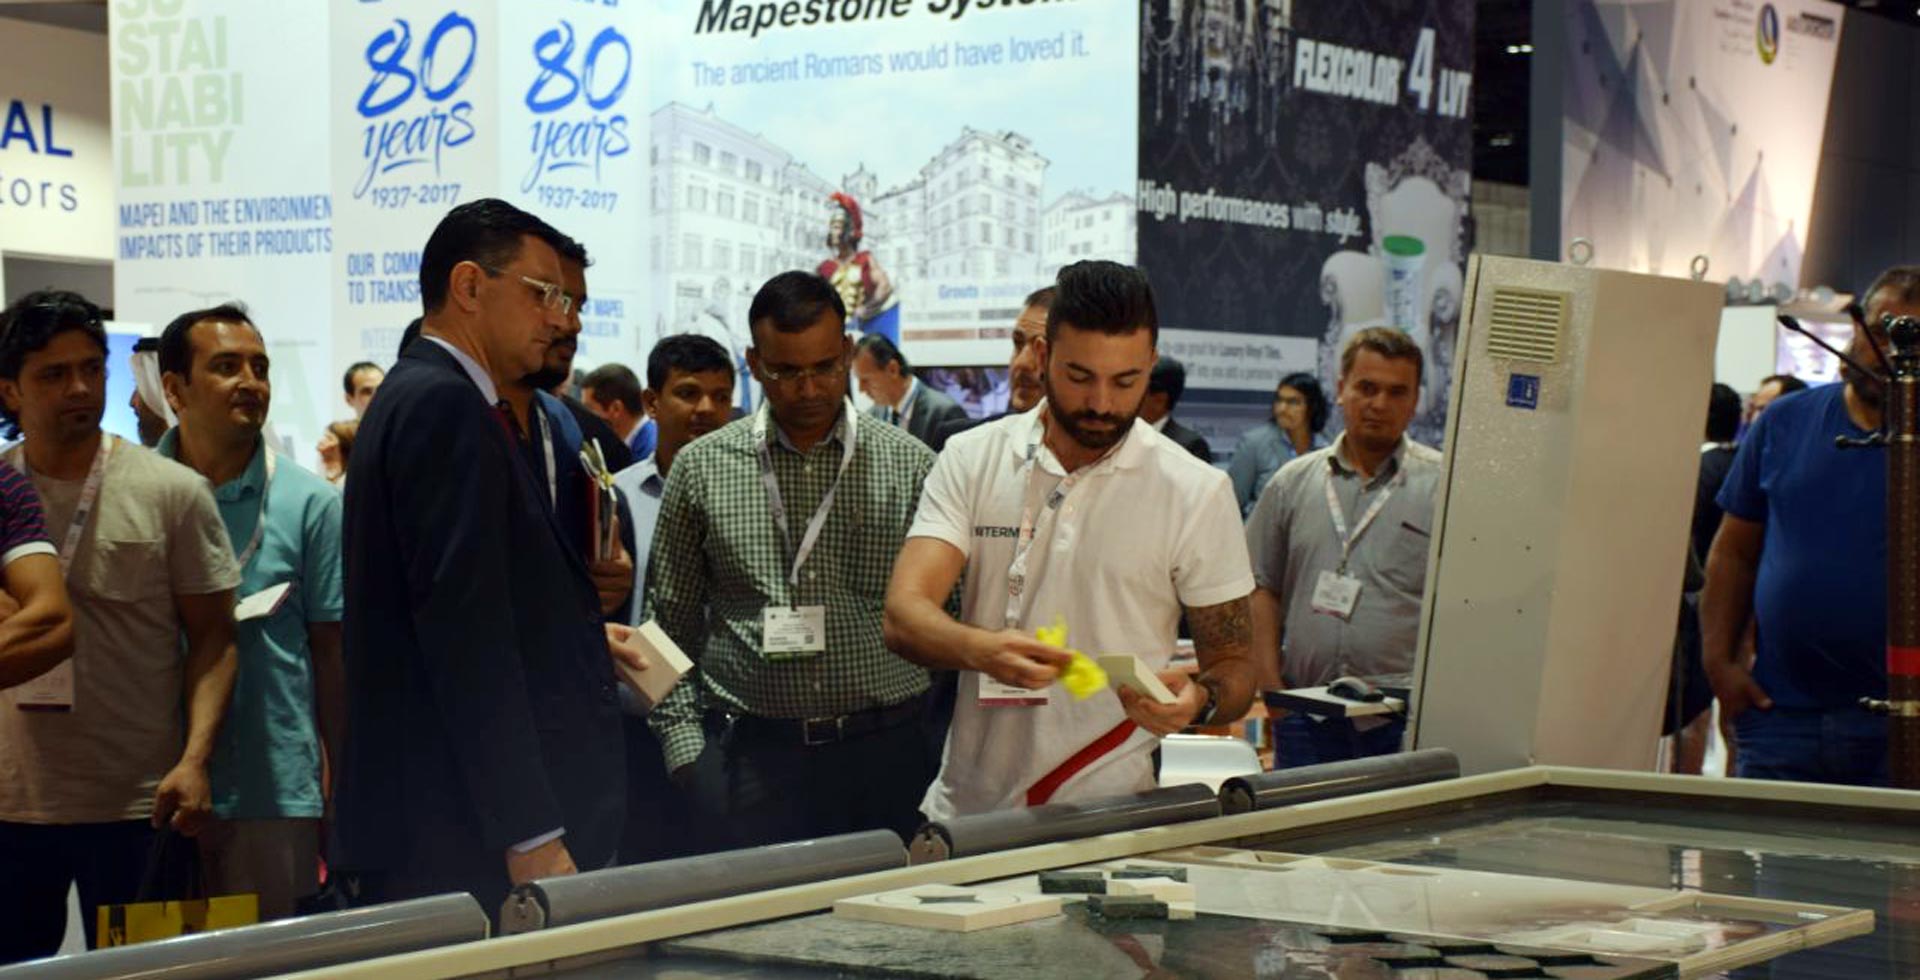 Waterjet cutting technology on show at Middle east Stone